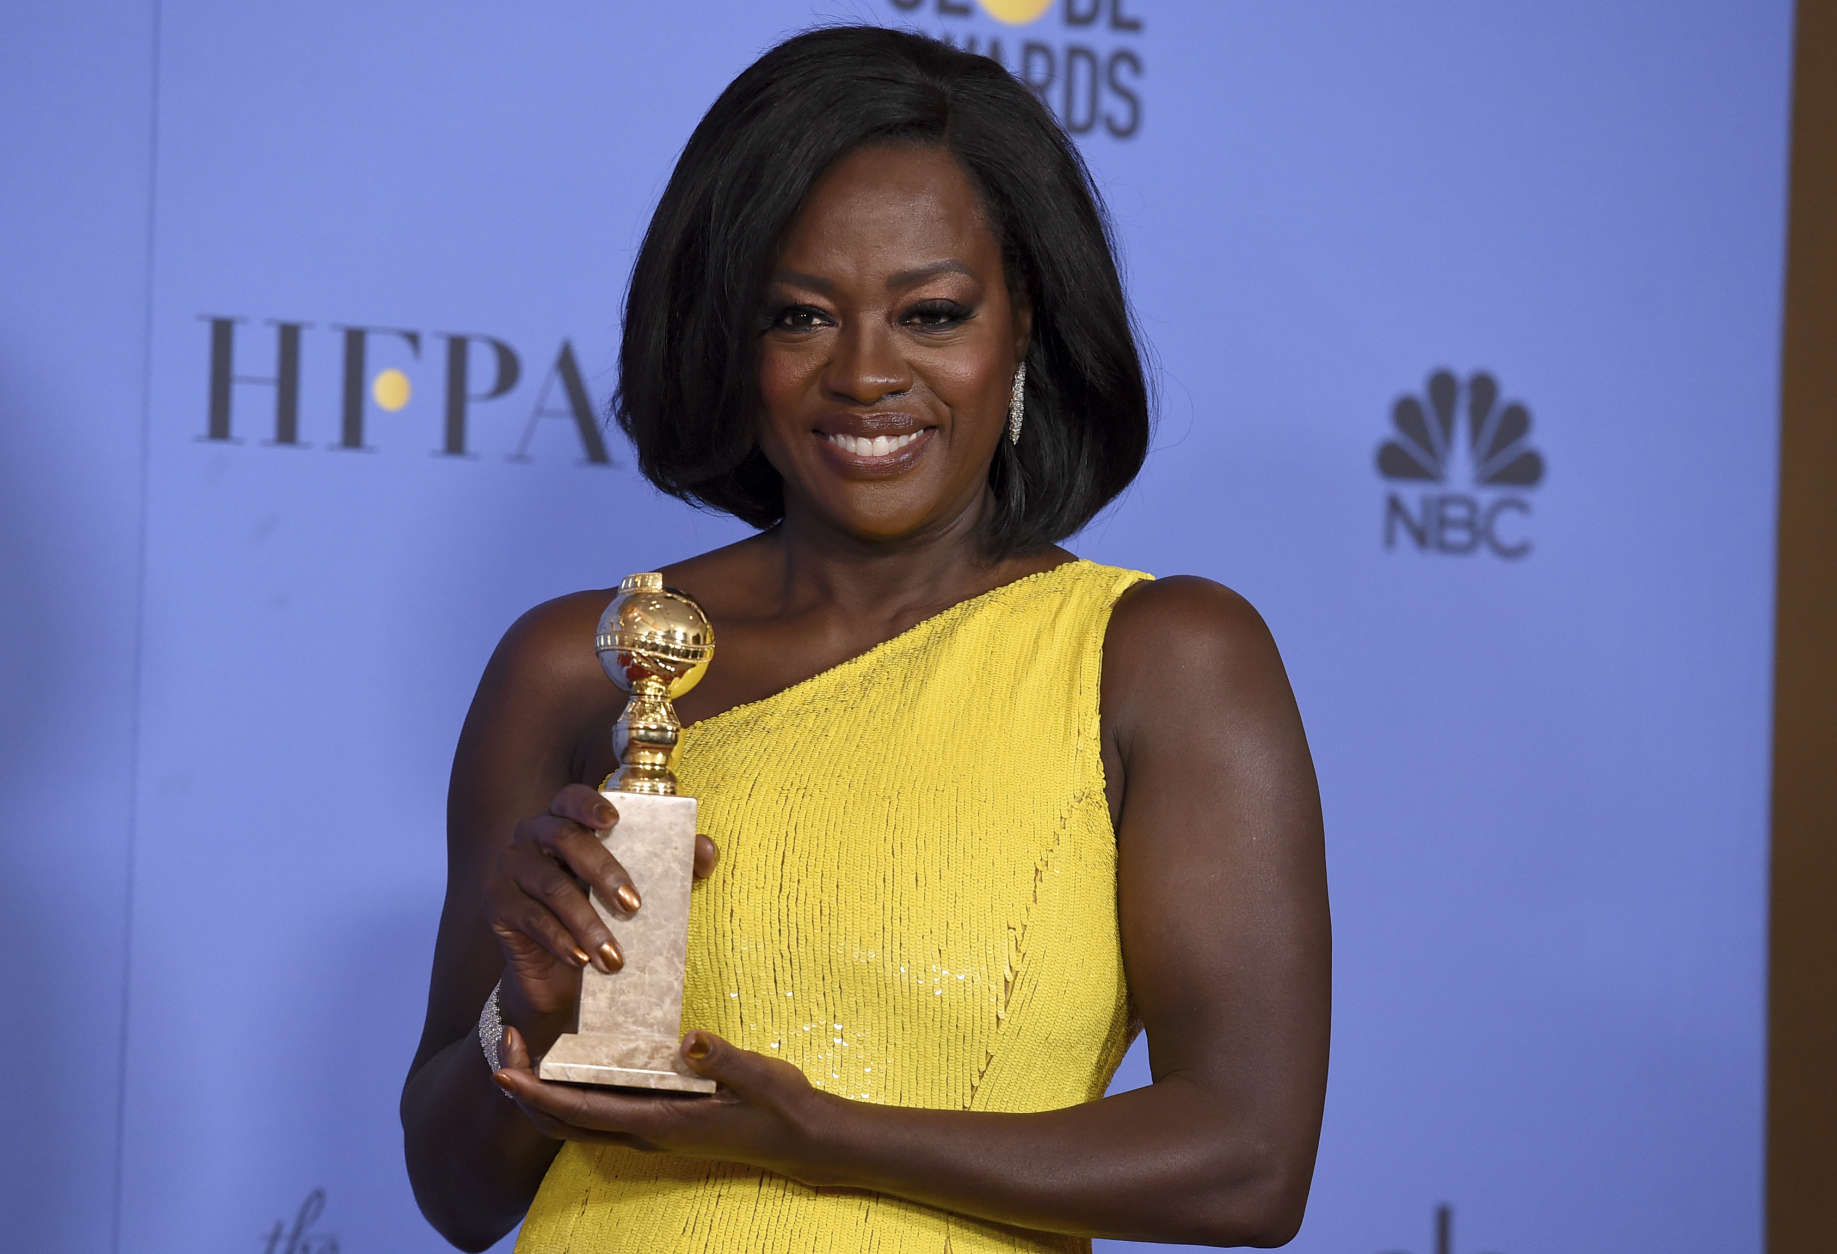 Viola Davis poses in the press room with the award for best performance by an actress in a supporting role in any motion picture for "Fences" at the 74th annual Golden Globe Awards at the Beverly Hilton Hotel on Sunday, Jan. 8, 2017, in Beverly Hills, Calif. (Photo by Jordan Strauss/Invision/AP)